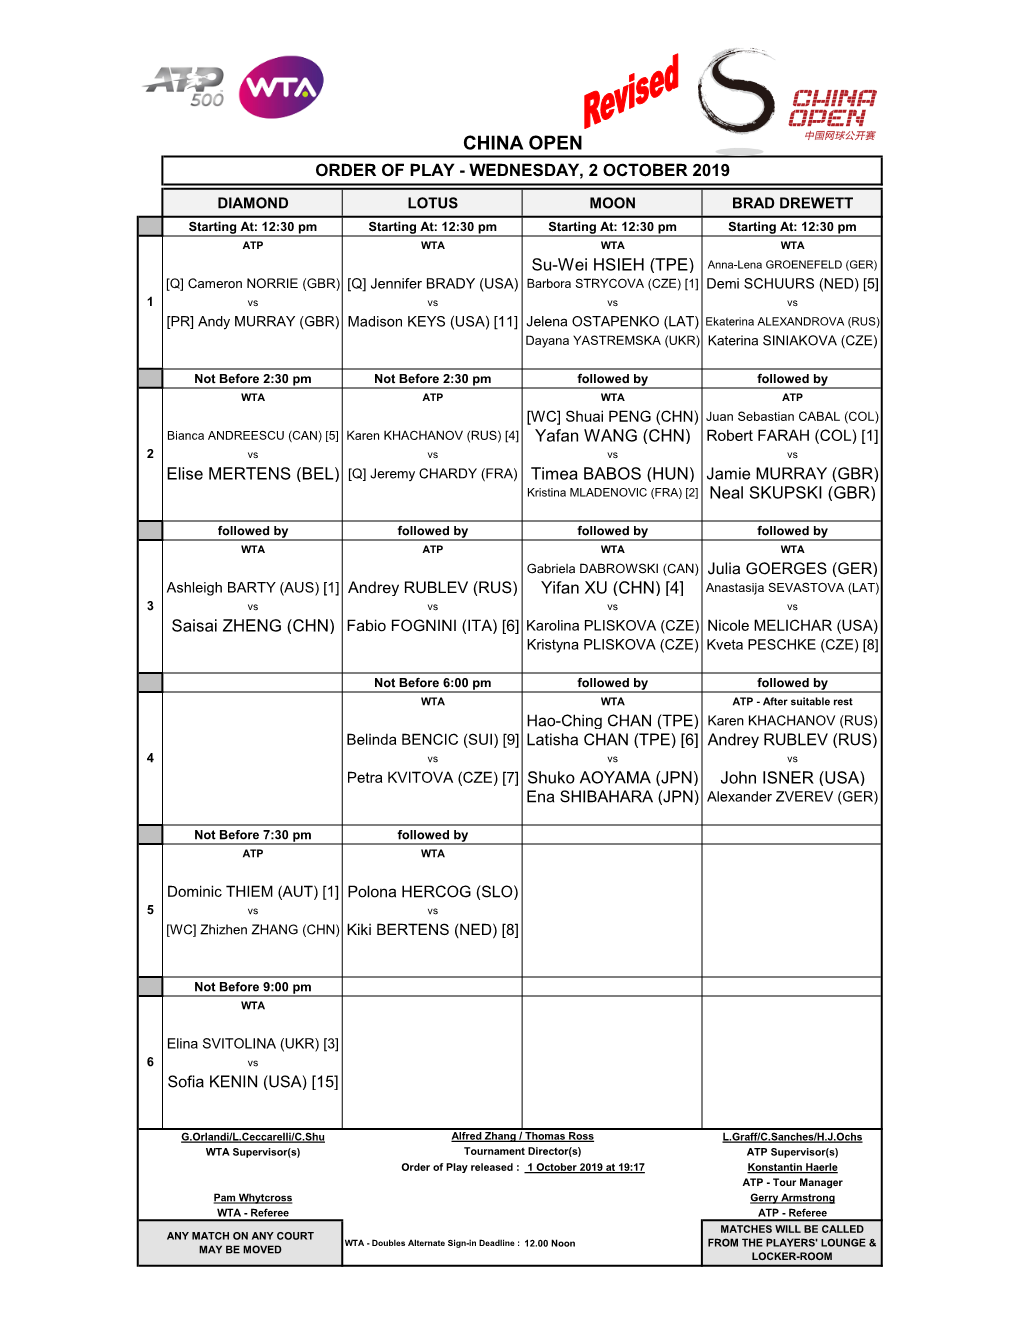 China Open Order of Play - Wednesday, 2 October 2019